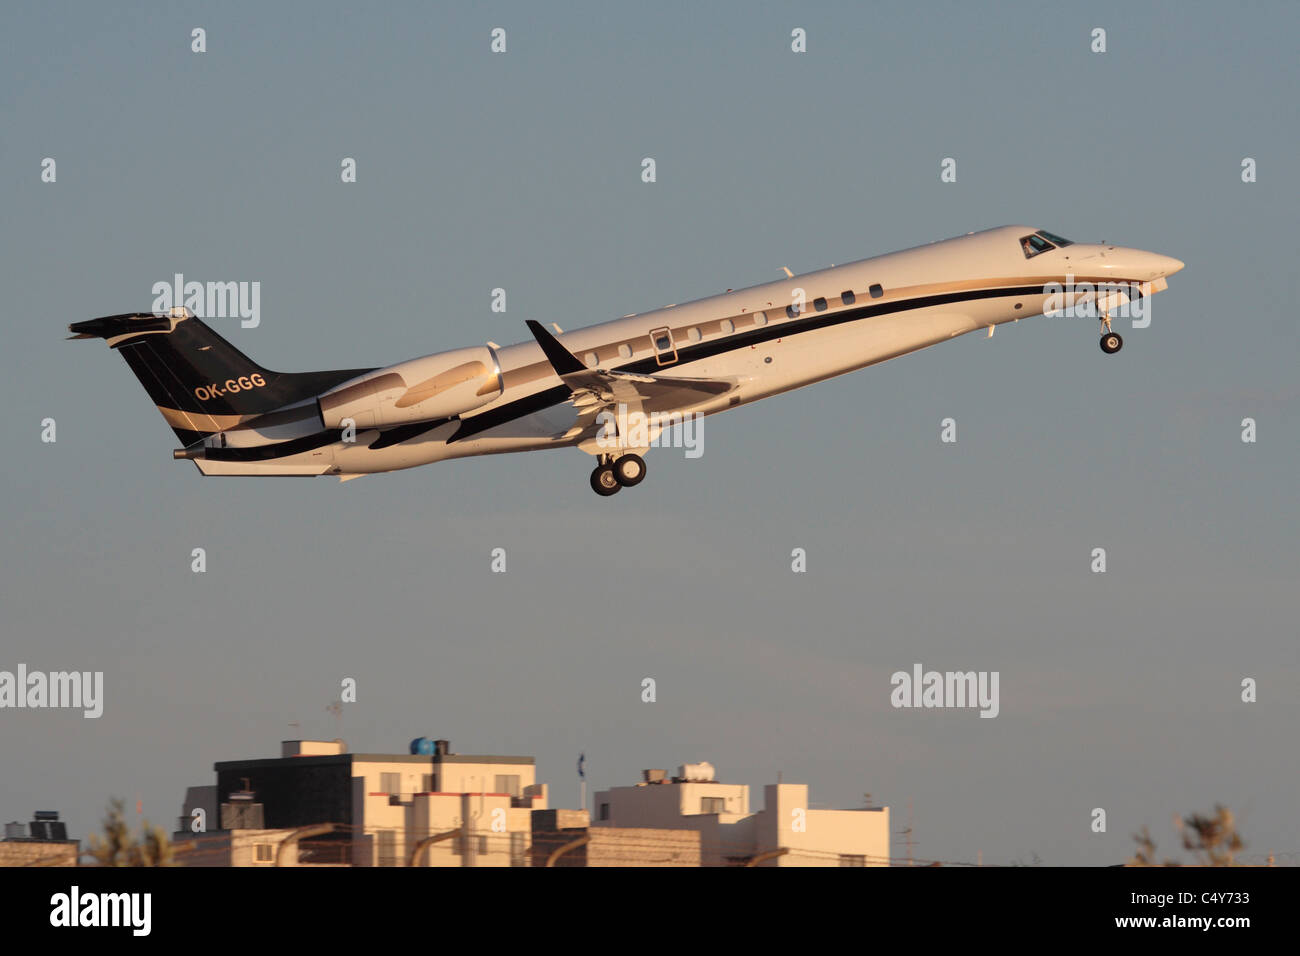 Embraer Legacy 600 business jet aircraft taking off at sunset Stock Photo